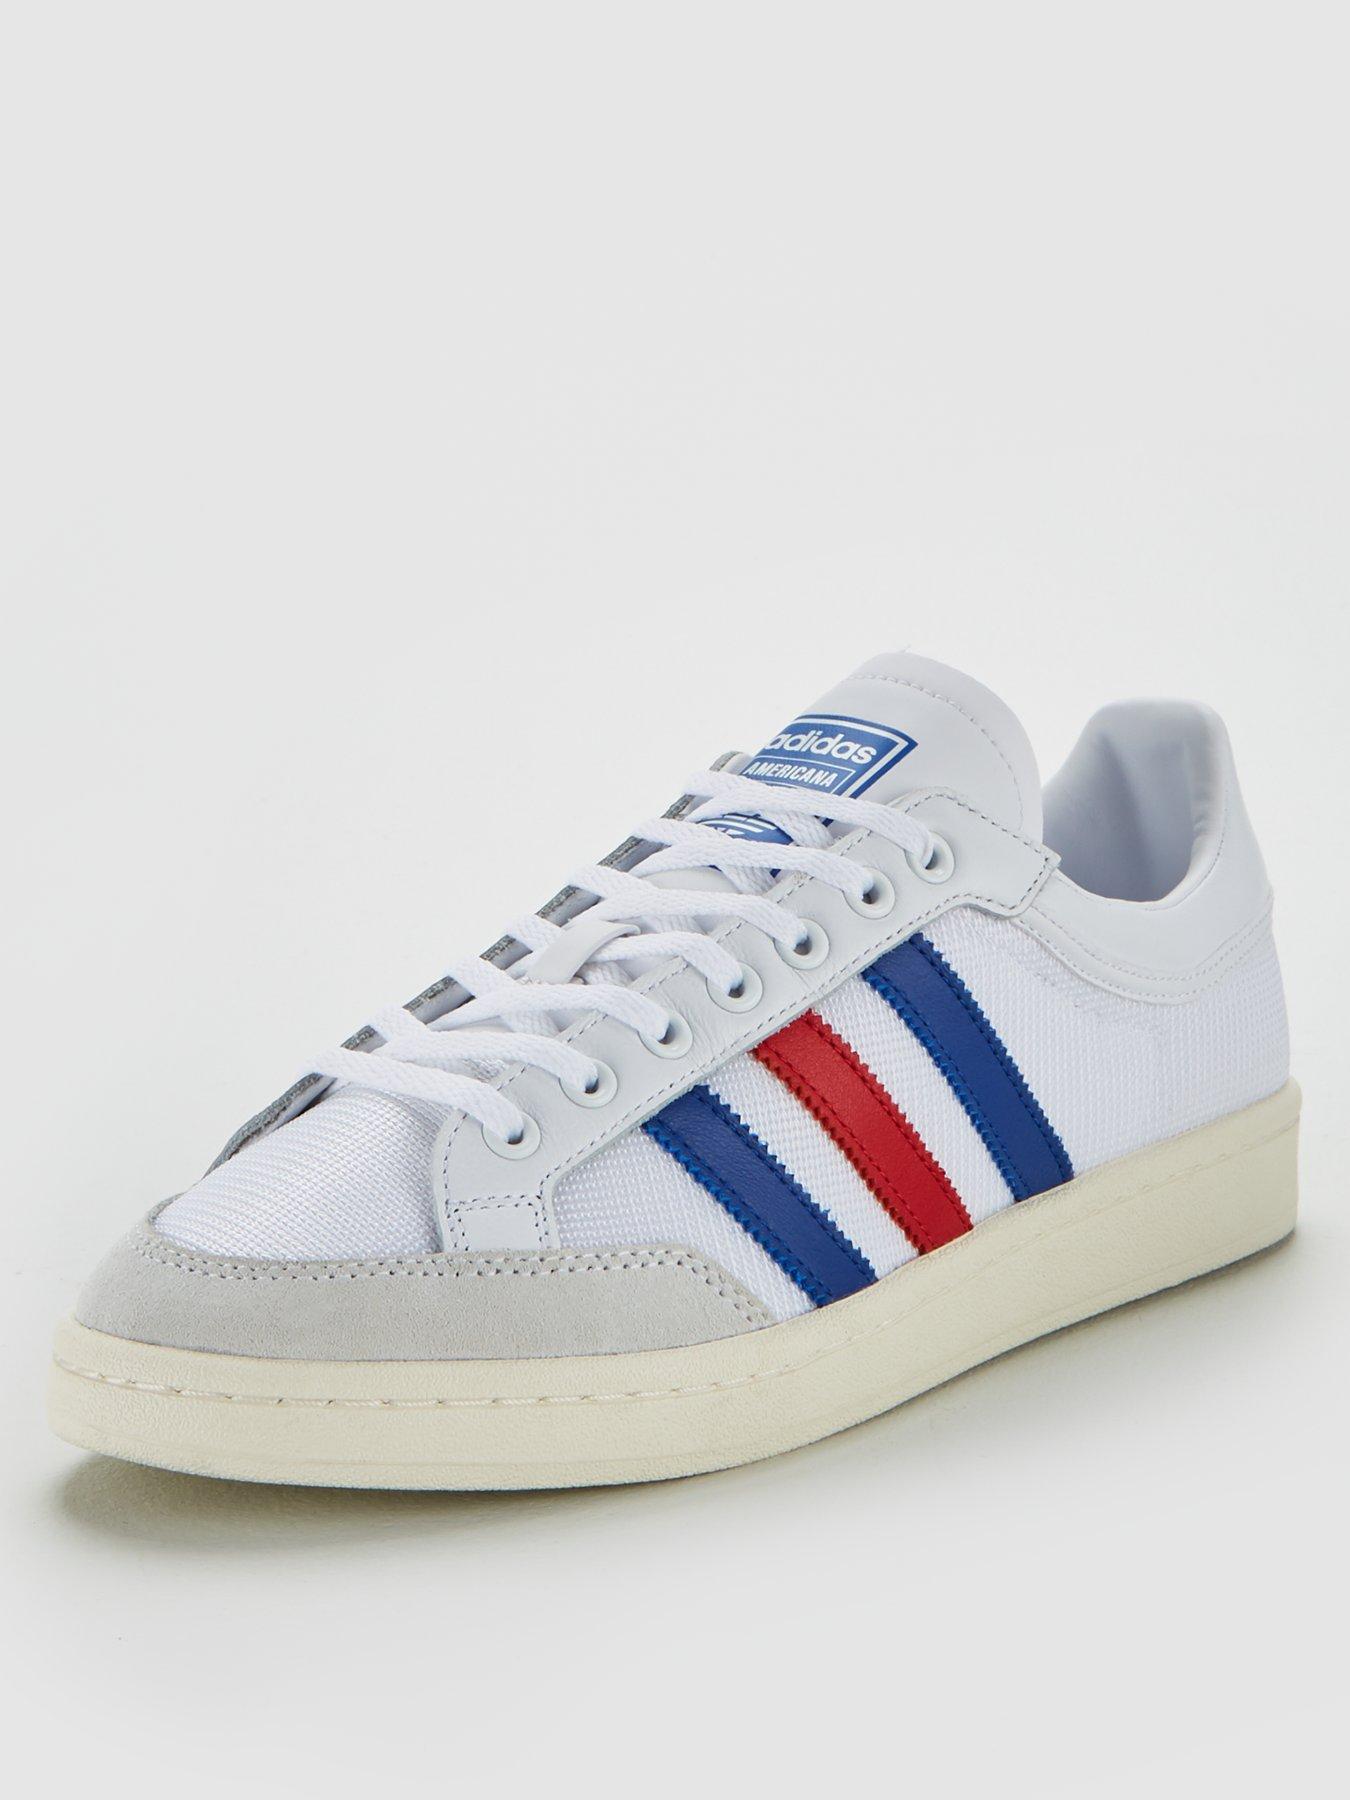 red white blue adidas trainers